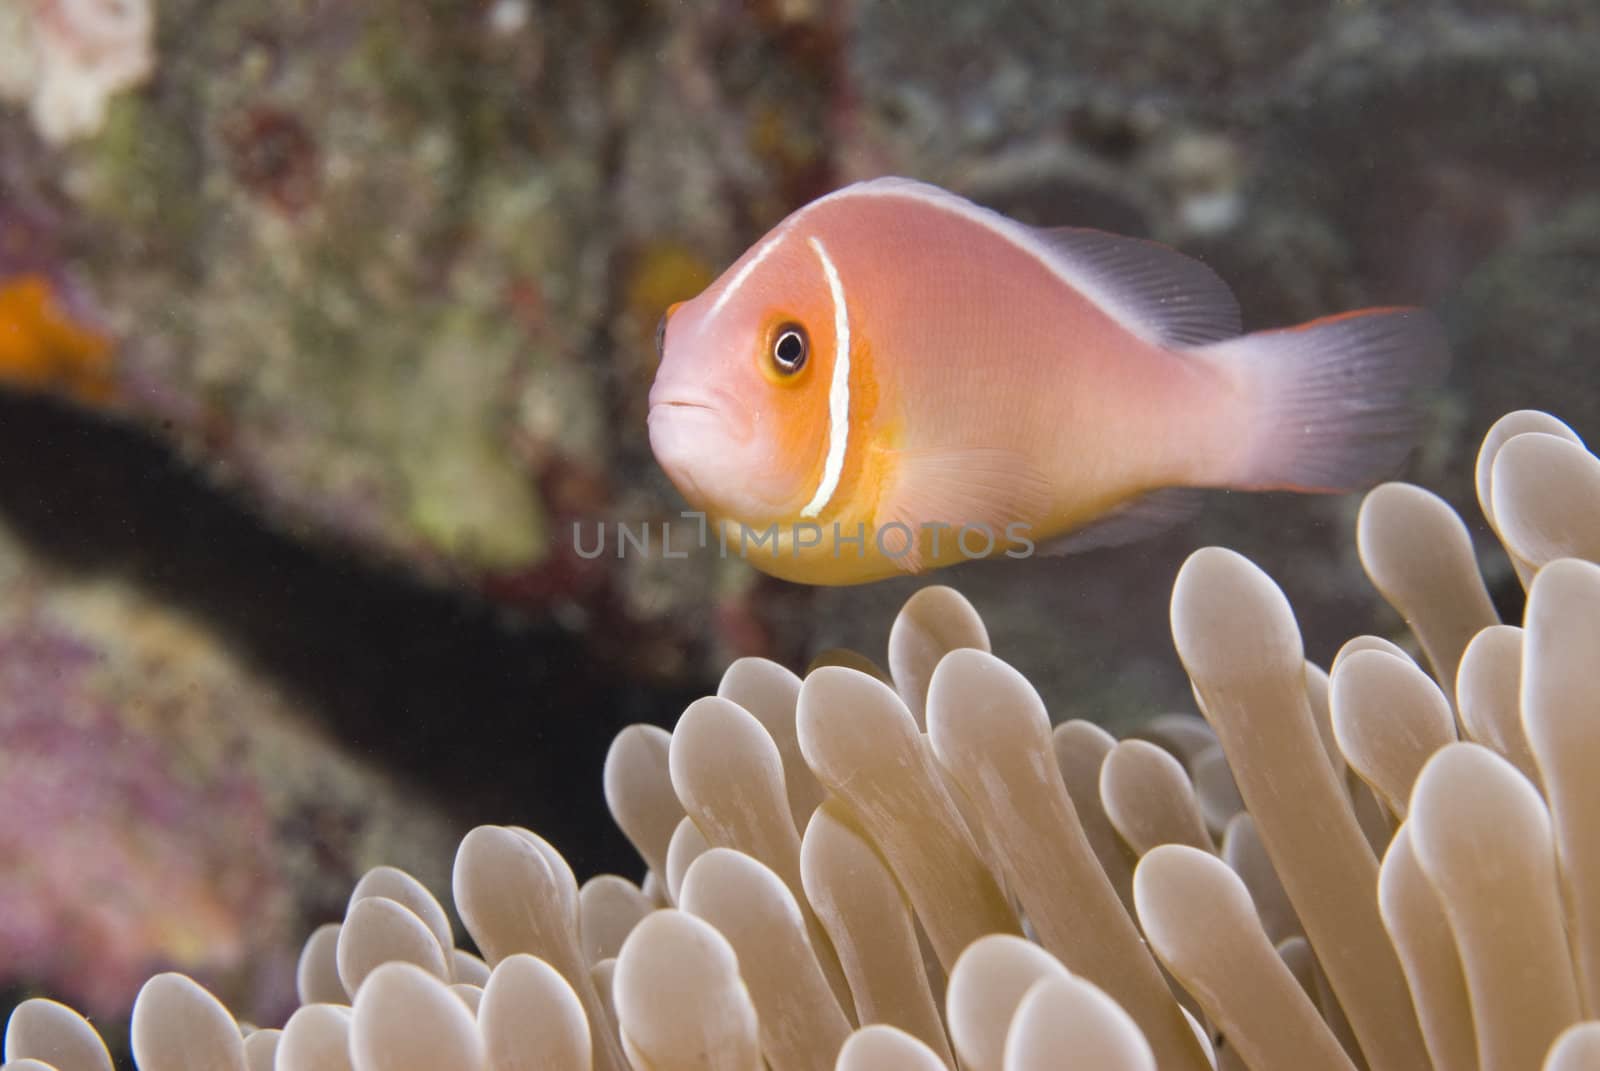 A Pink Anemonefish (Amphiprion perideraion) in Micronesia